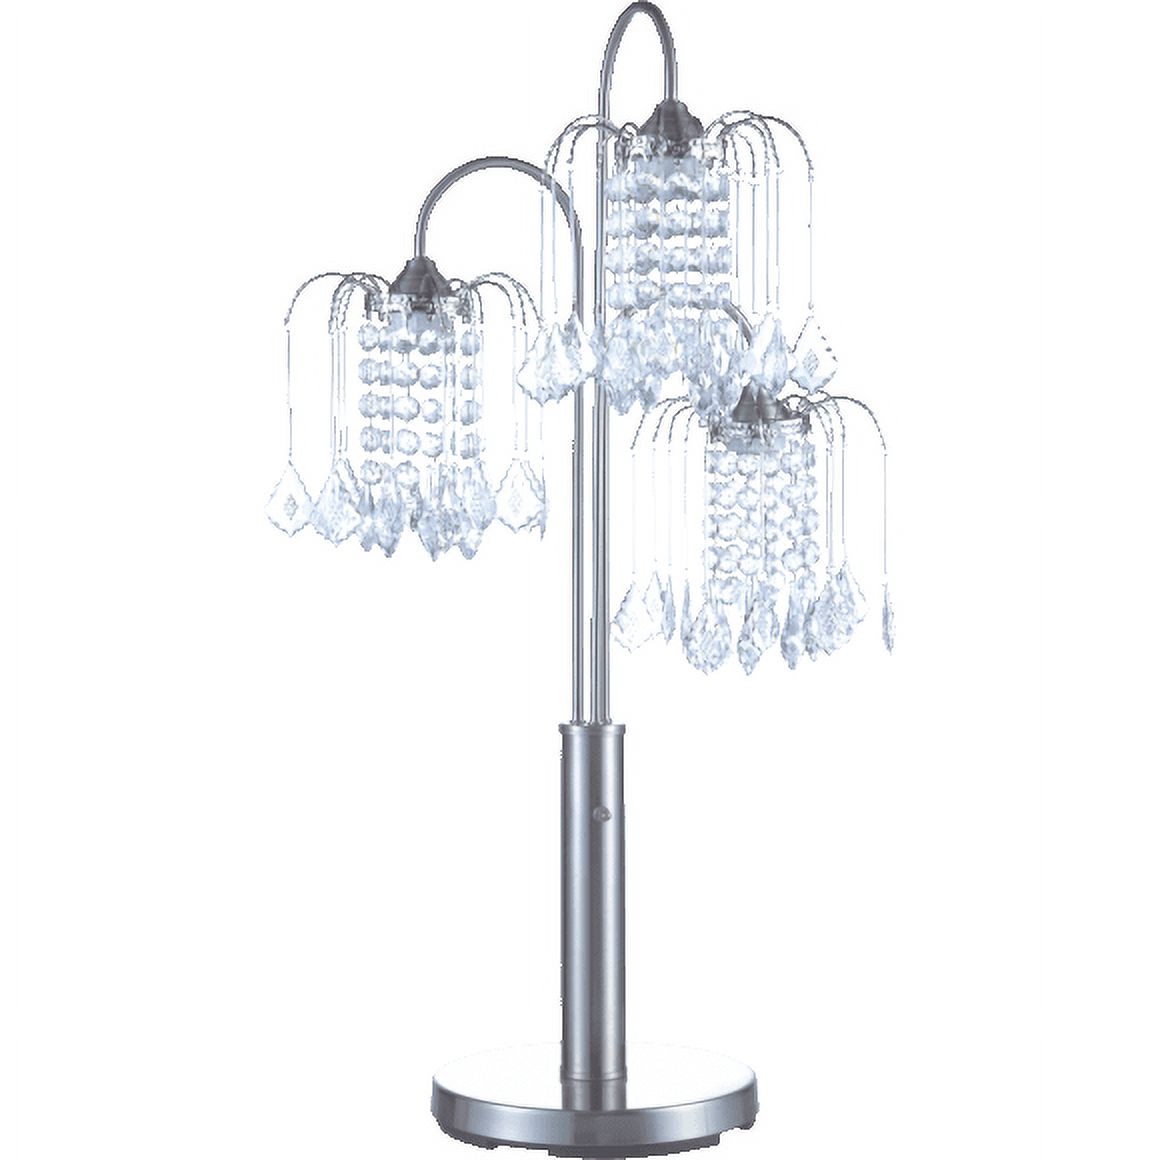 NEW Brushed Steel Base Finish & Faux Crystal Ornaments Shades 34" Table Lamp 716, 3 Bulb Included - image 1 of 1